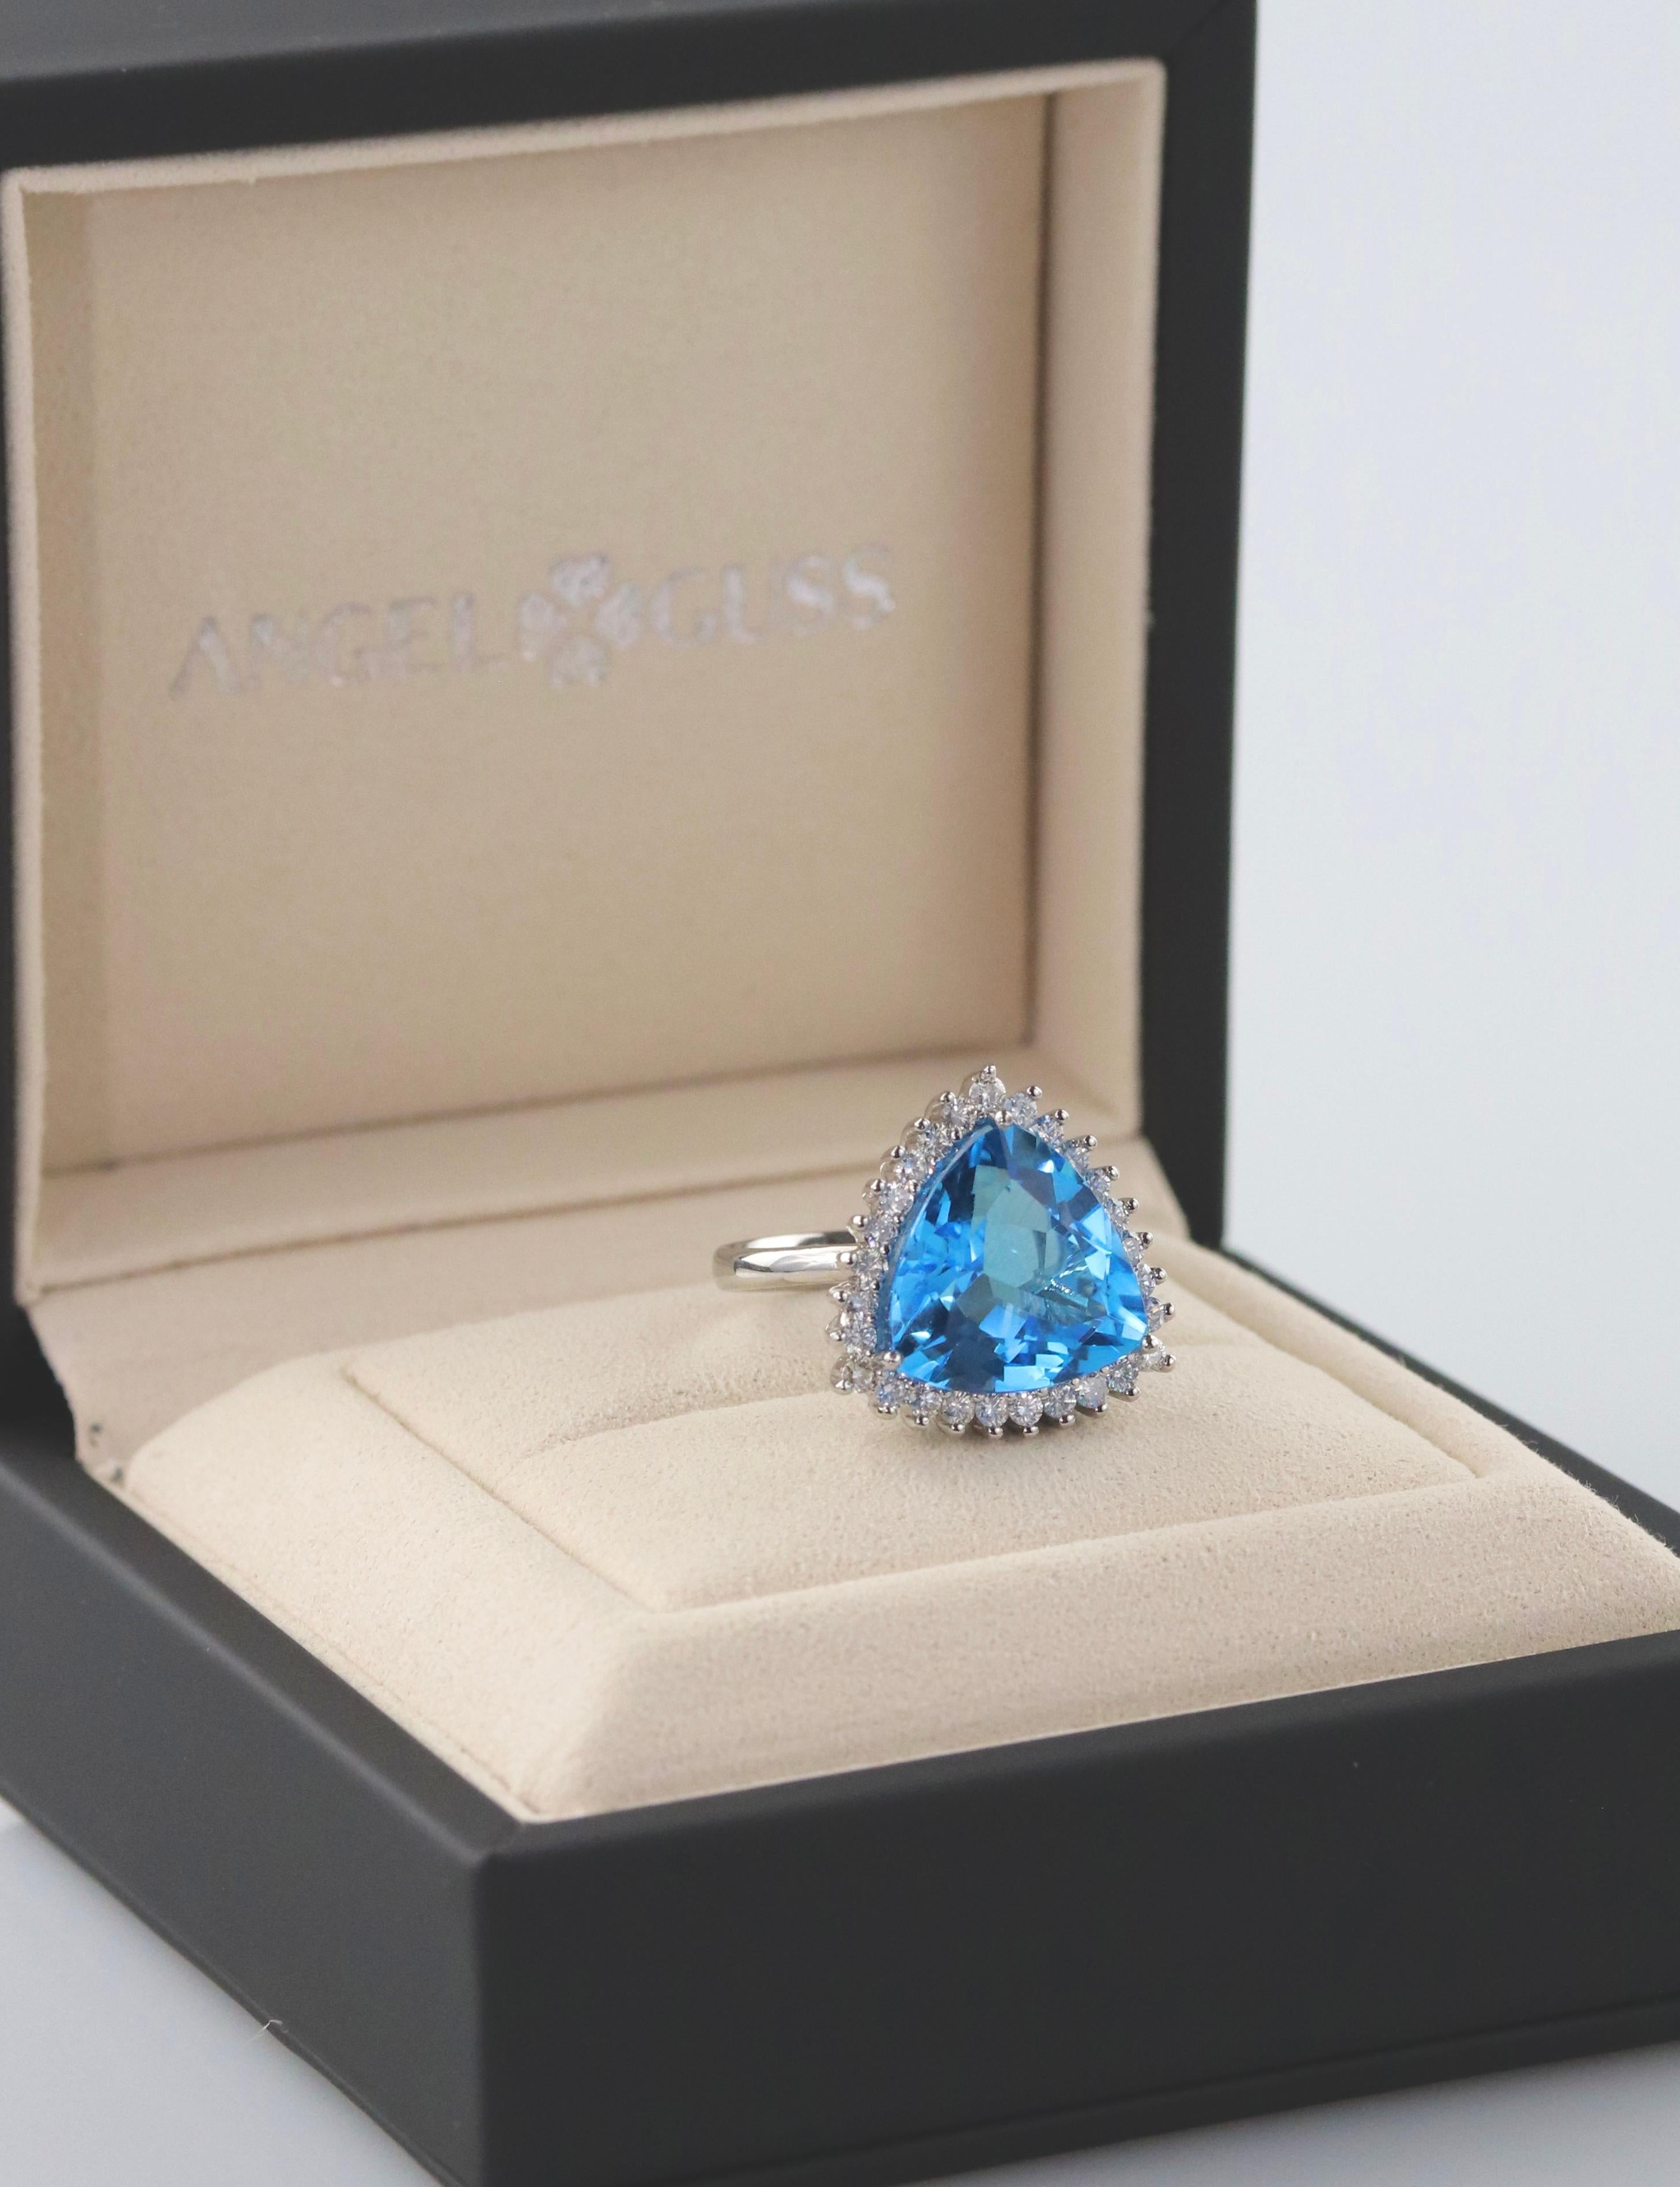 Swiss Topaz & Diamond Ring - 18K Solid Gold - Large Size  For Sale 4